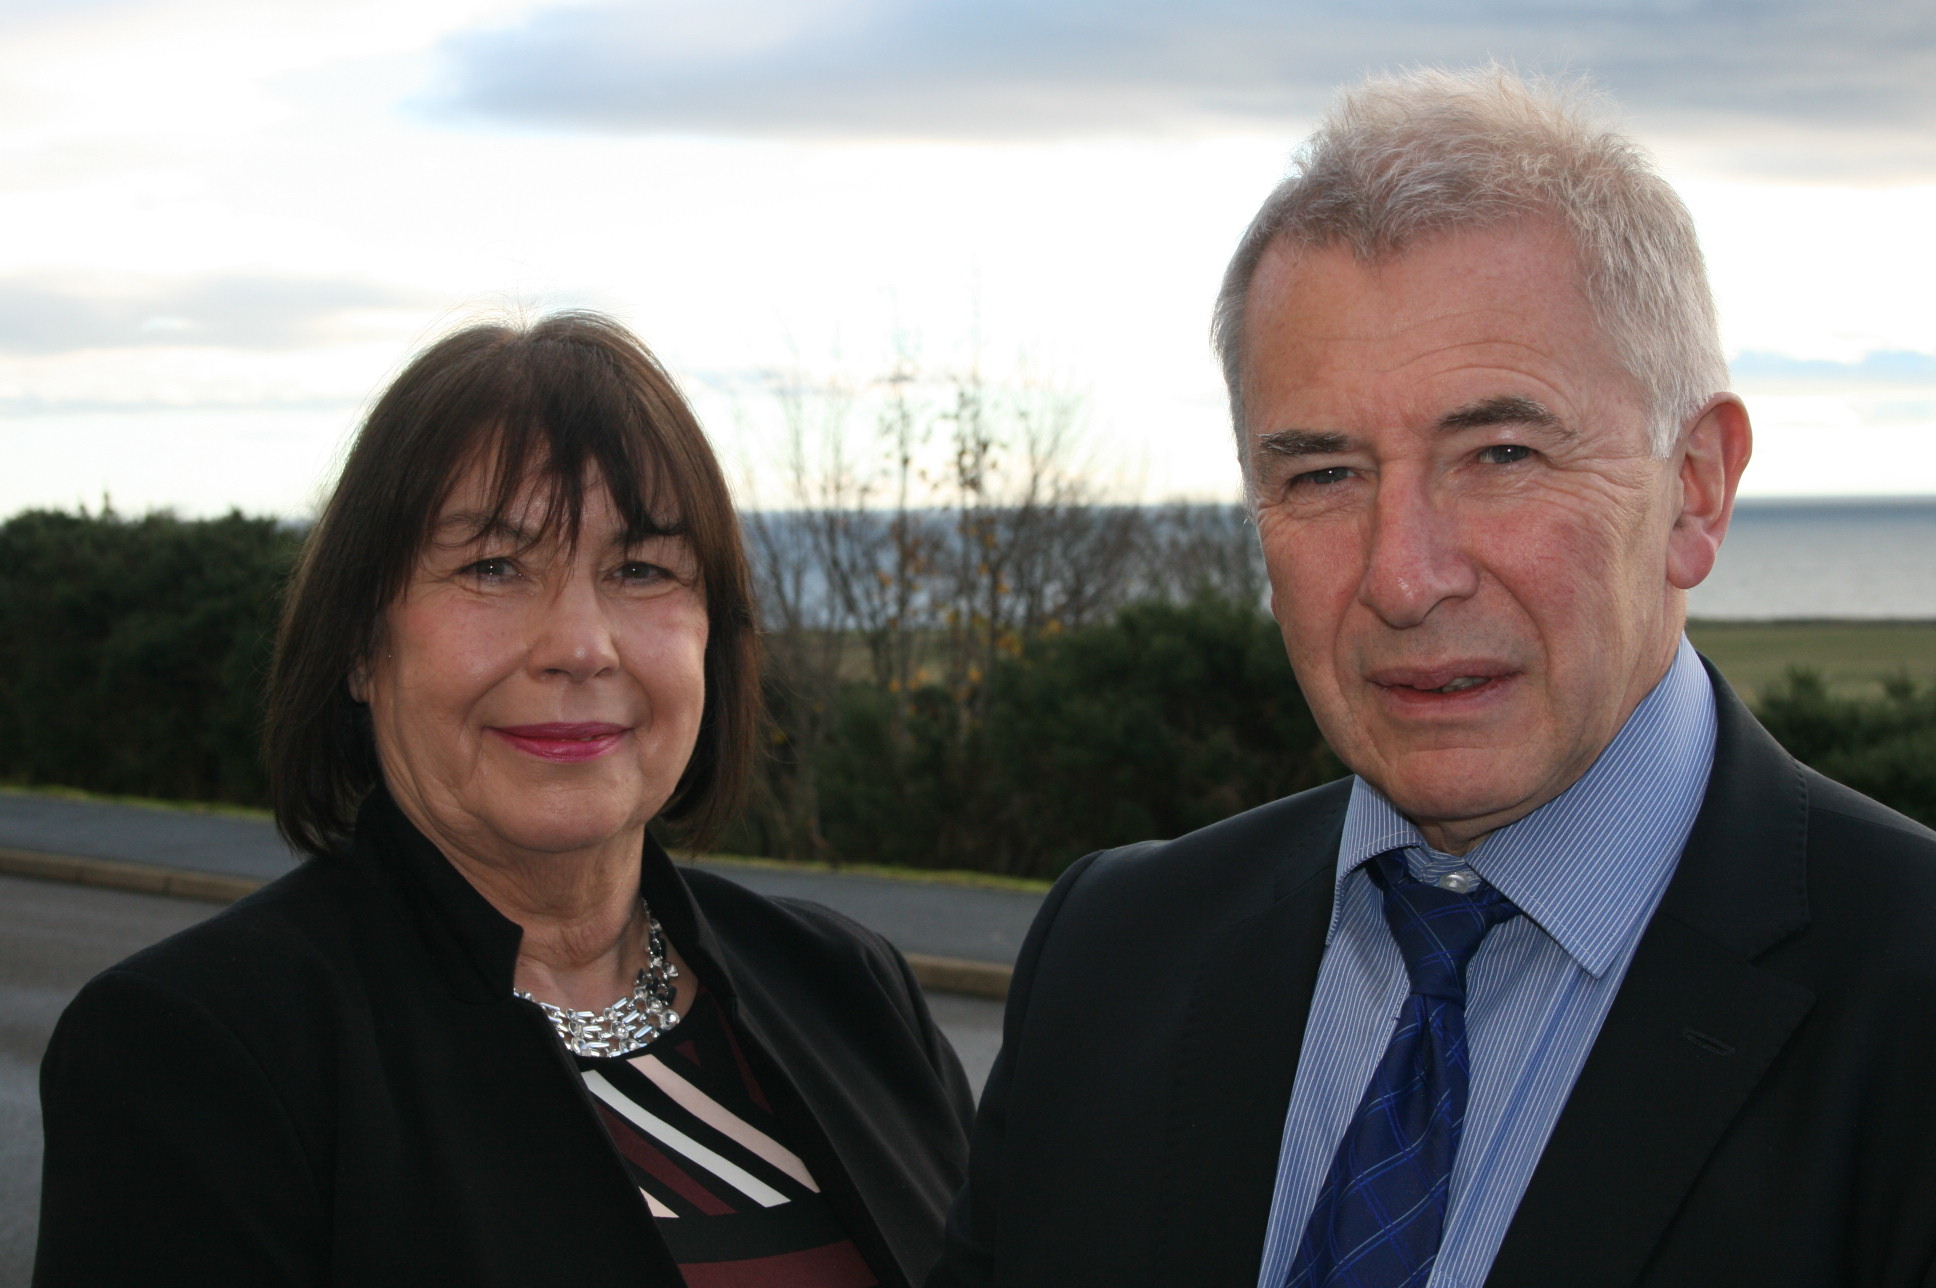 Sutherland councillors Linda Munro and Richard Gale, who takes over from Mrs Munro as chairman of Sutherland County Committee